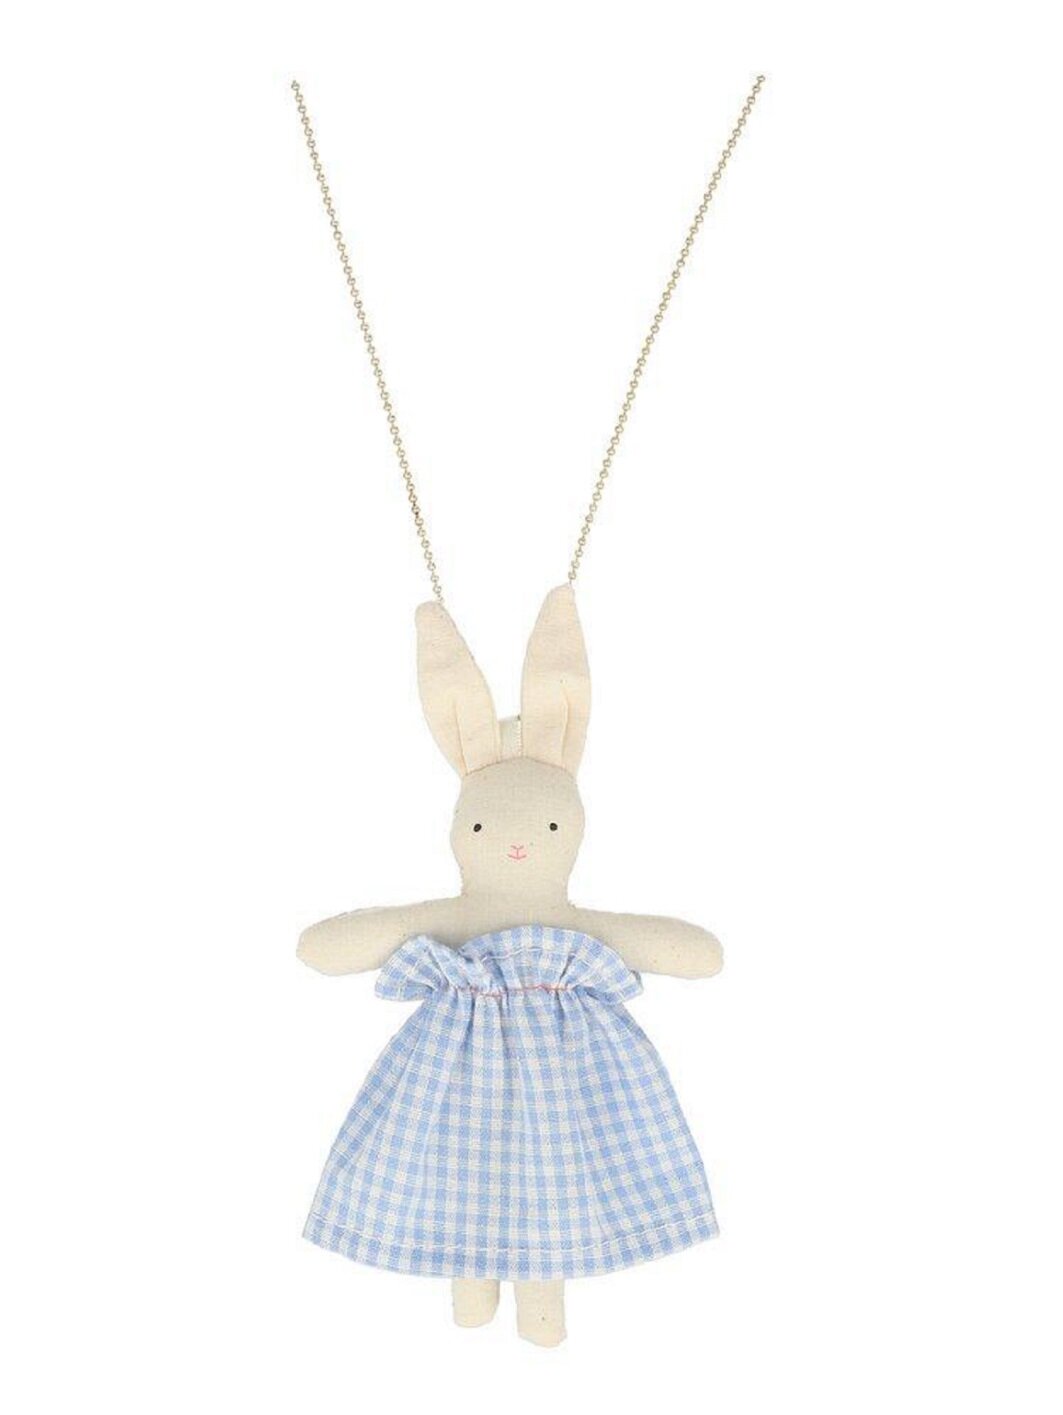 Bunny Doll necklace in blue check dress